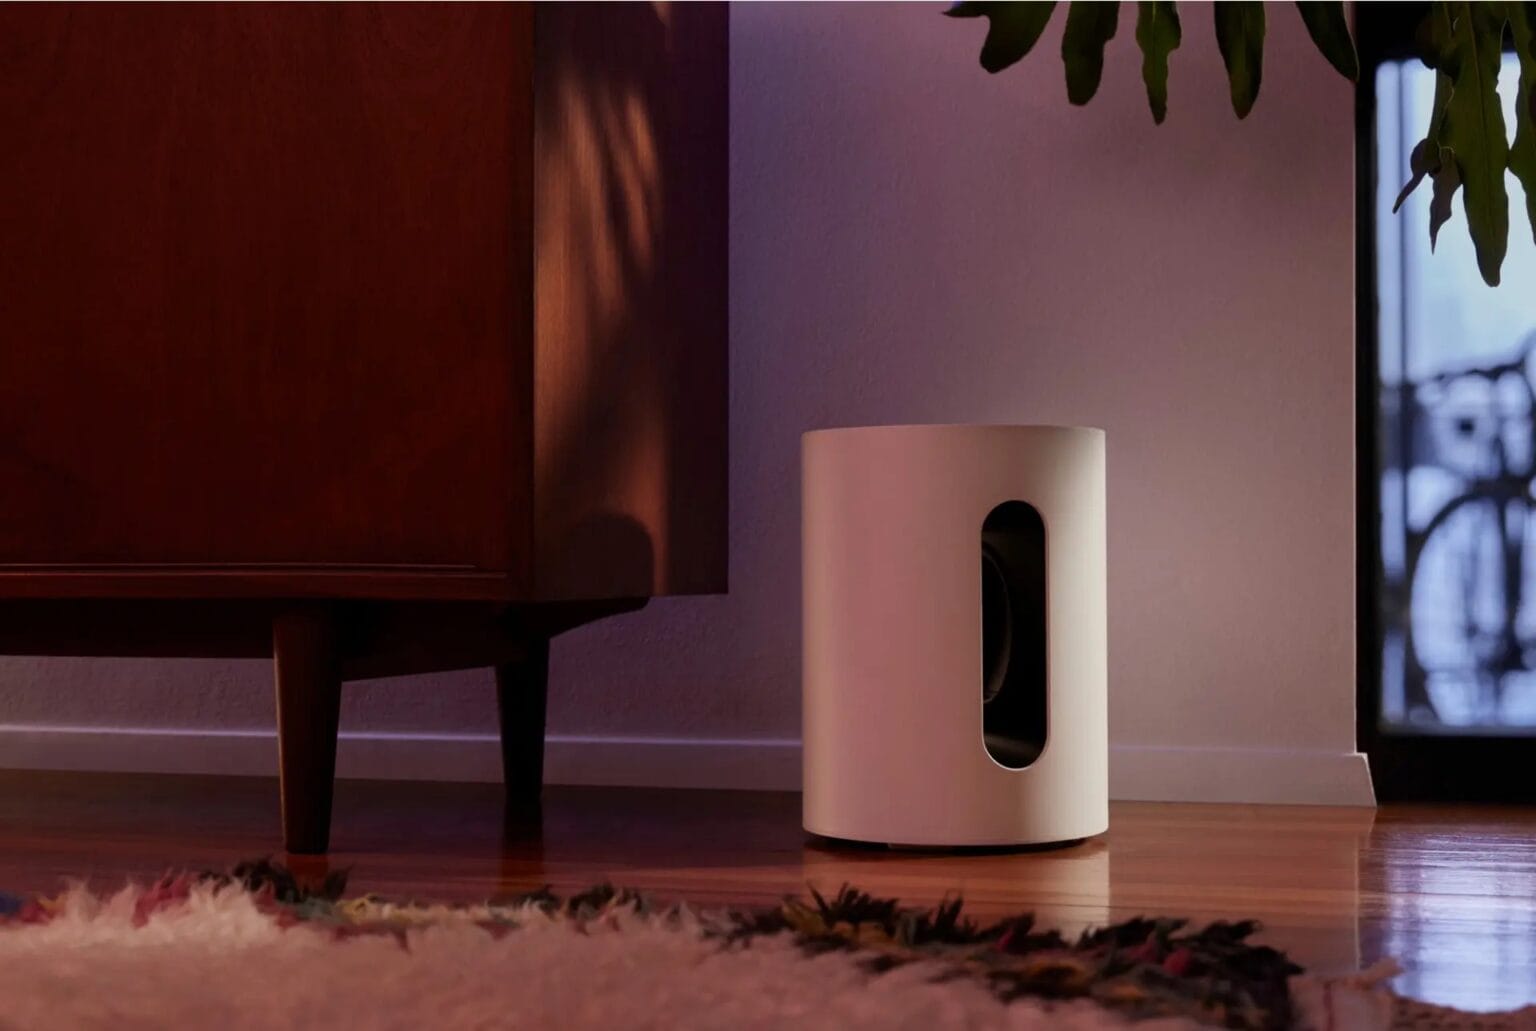 The new Sonos Sub Mini is designed to punch up bass while blending in.